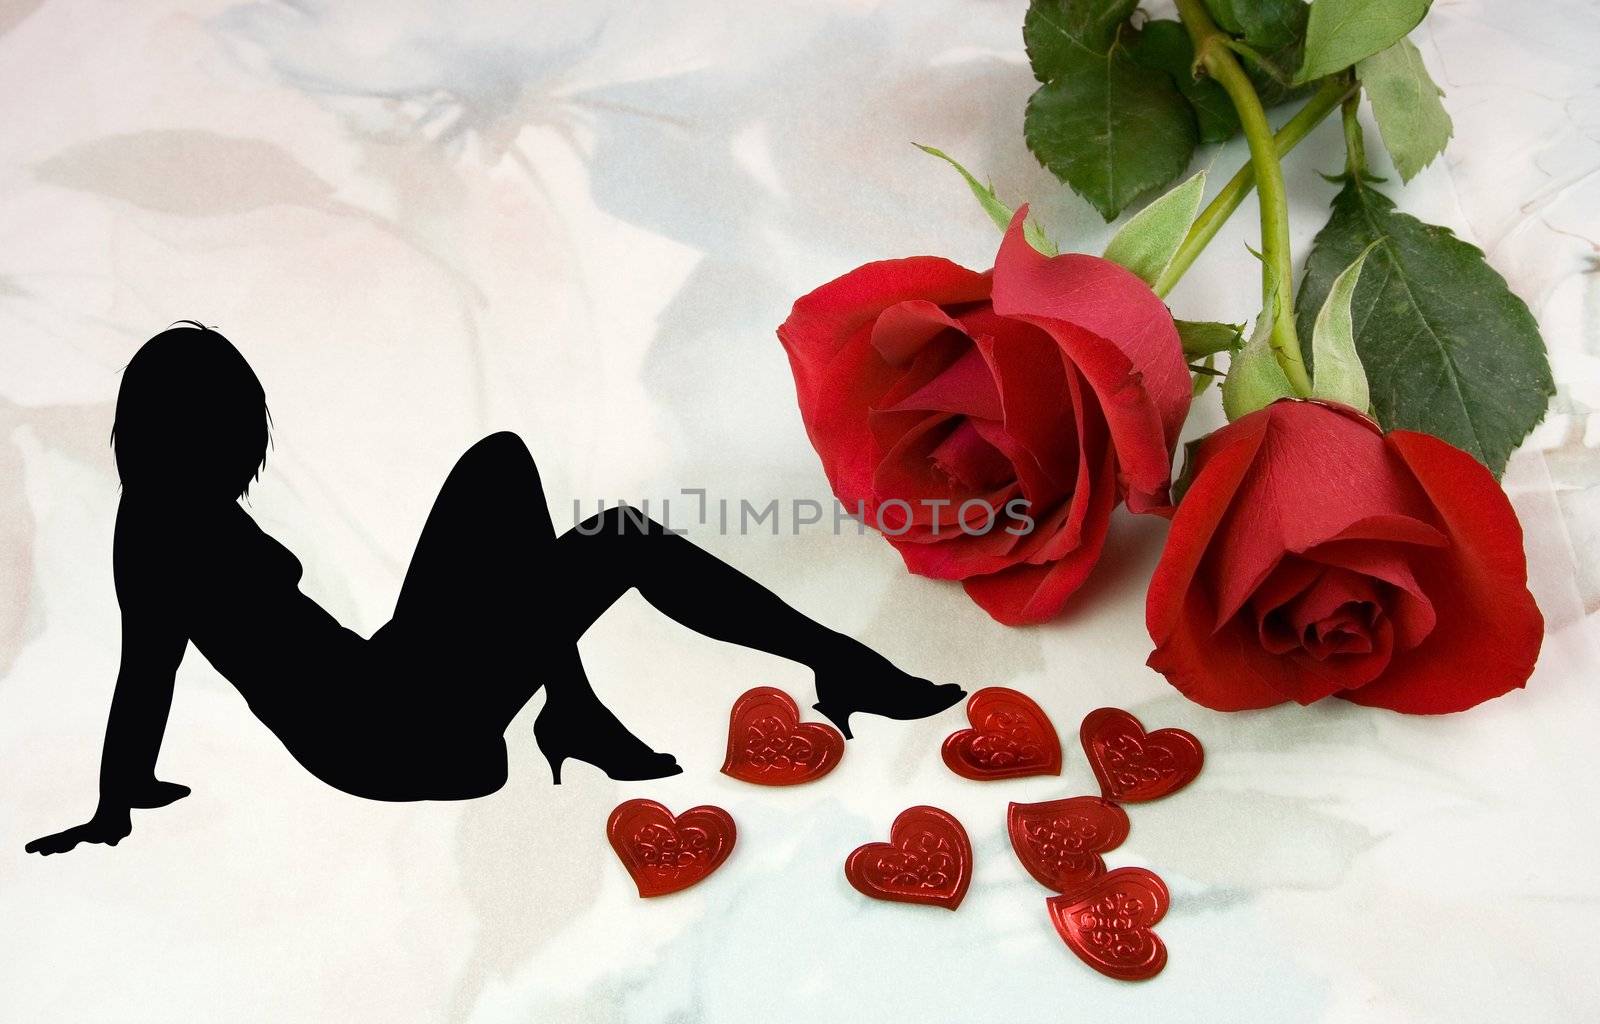 Nice combiination for your valentine day decoration